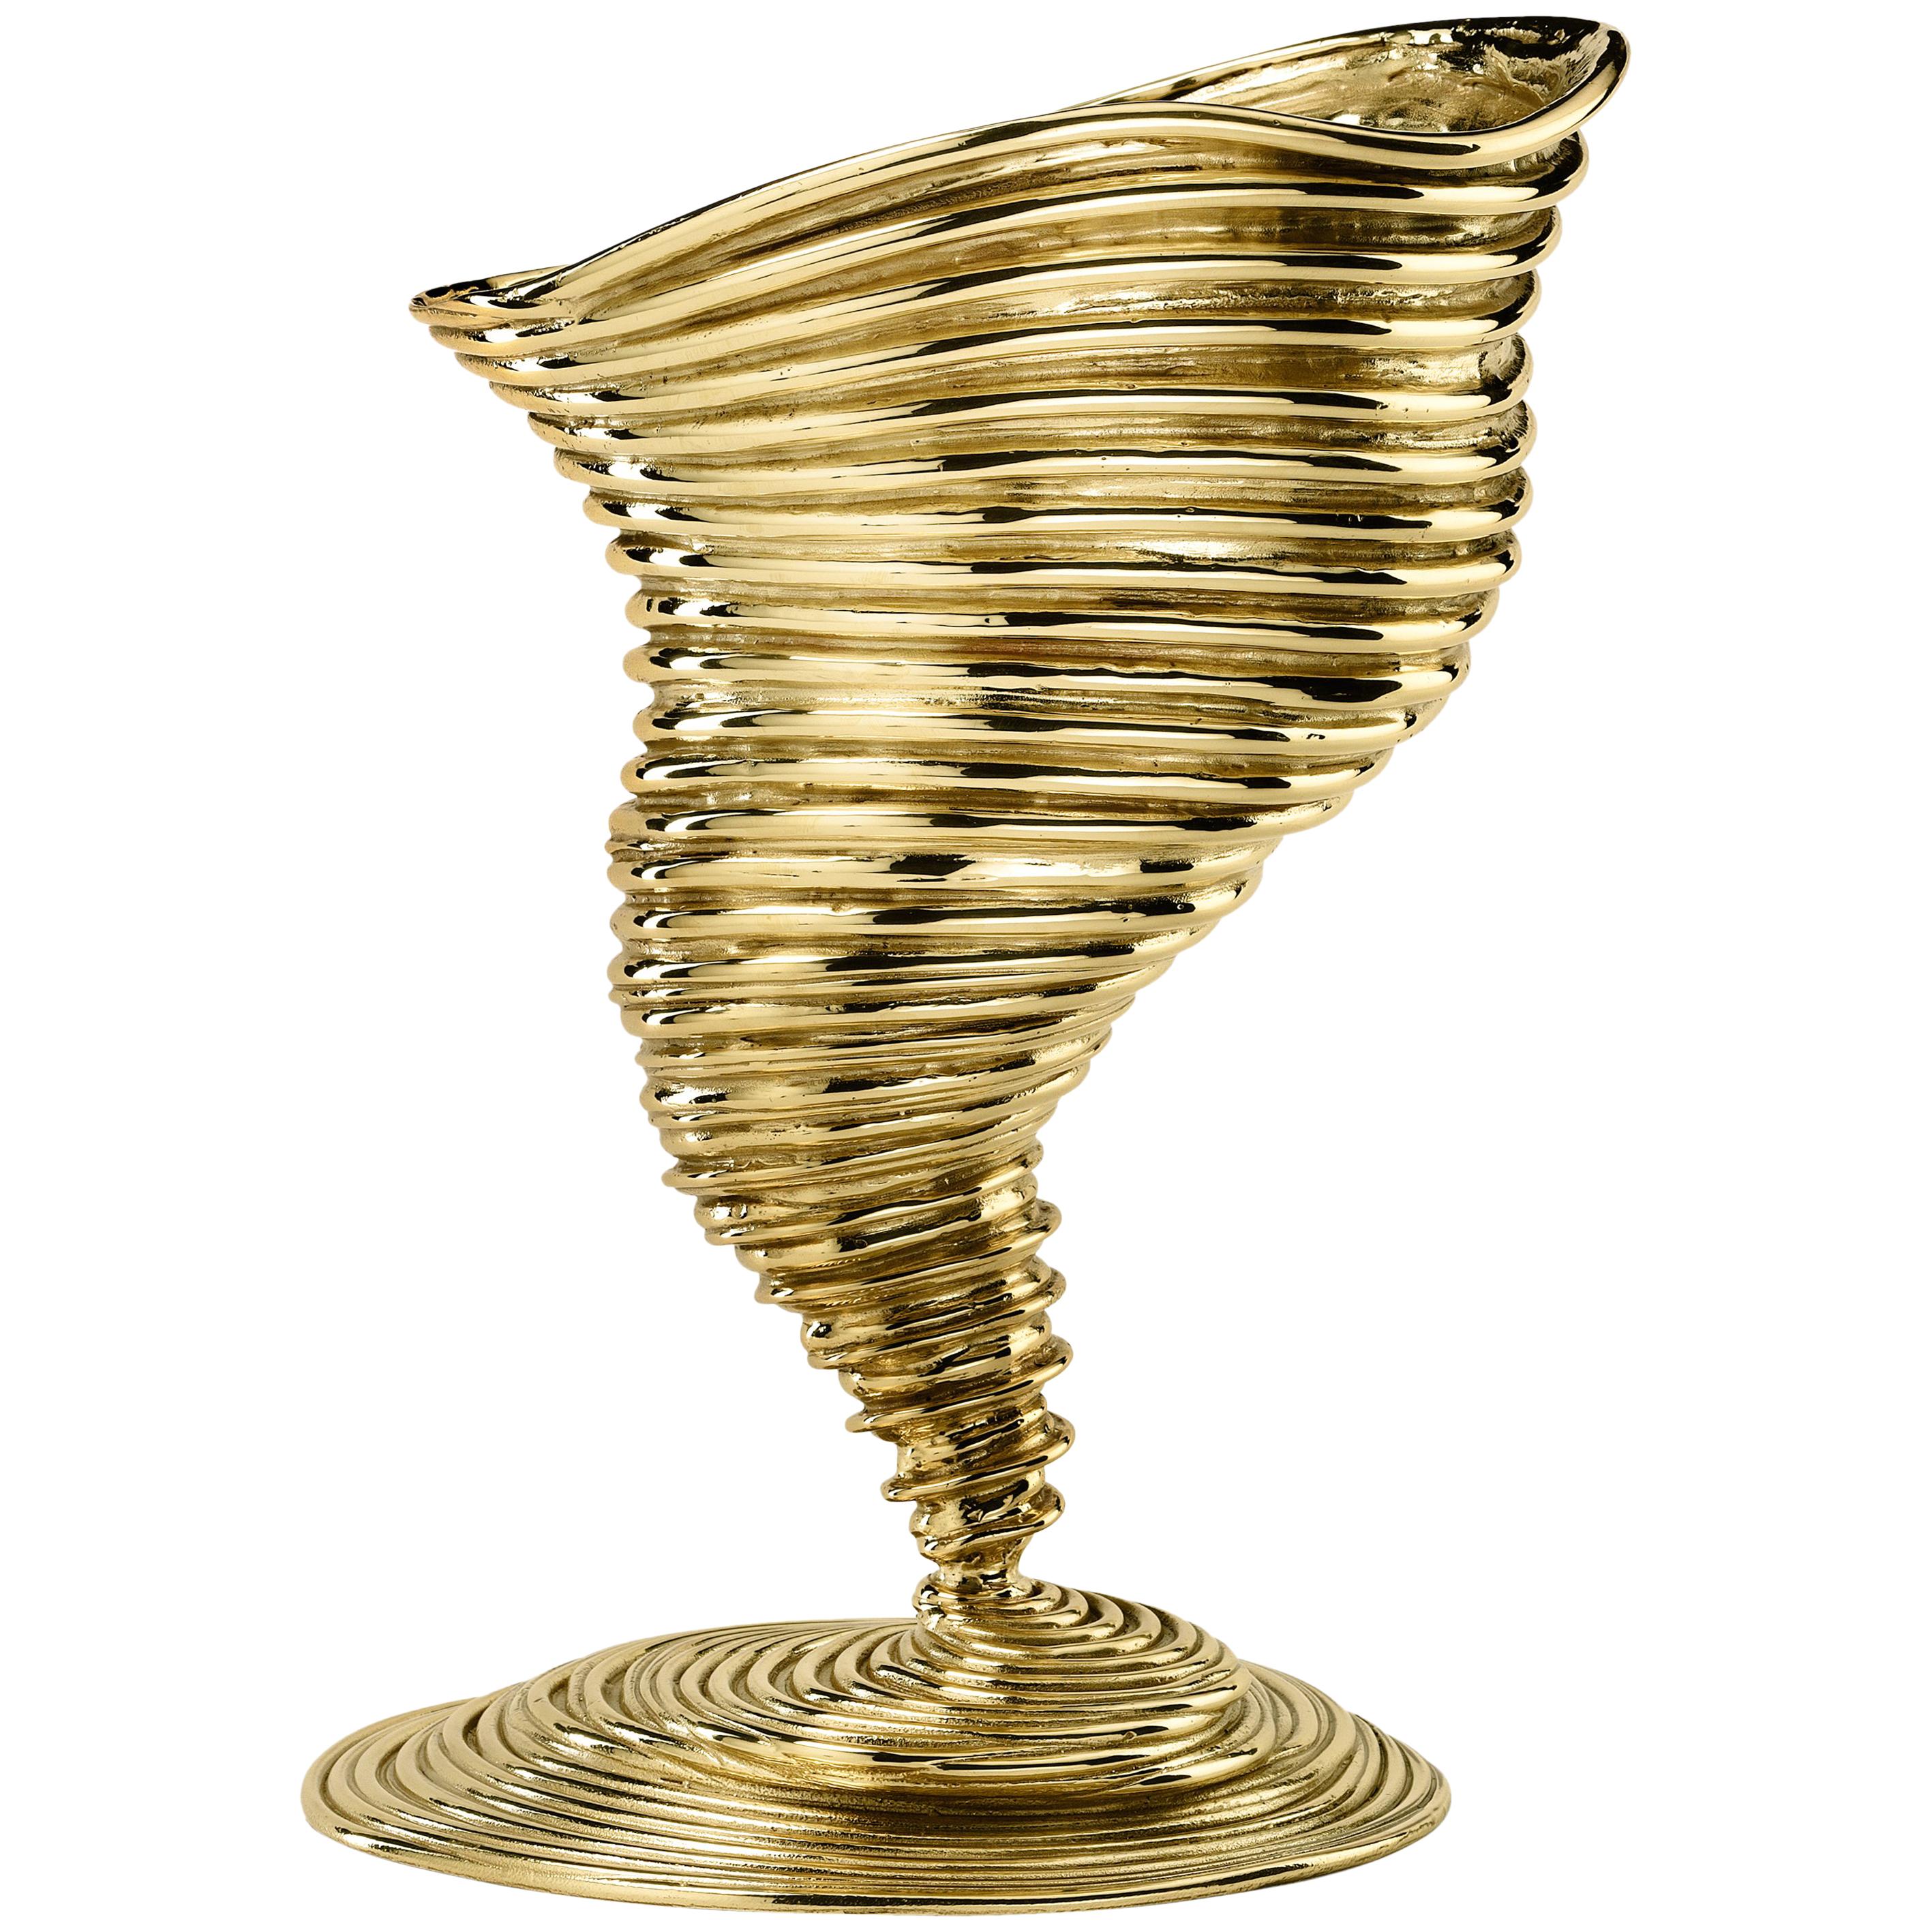 Ghidini 1961 Tornado Vase in Polished Brass by Campana Brothers For Sale